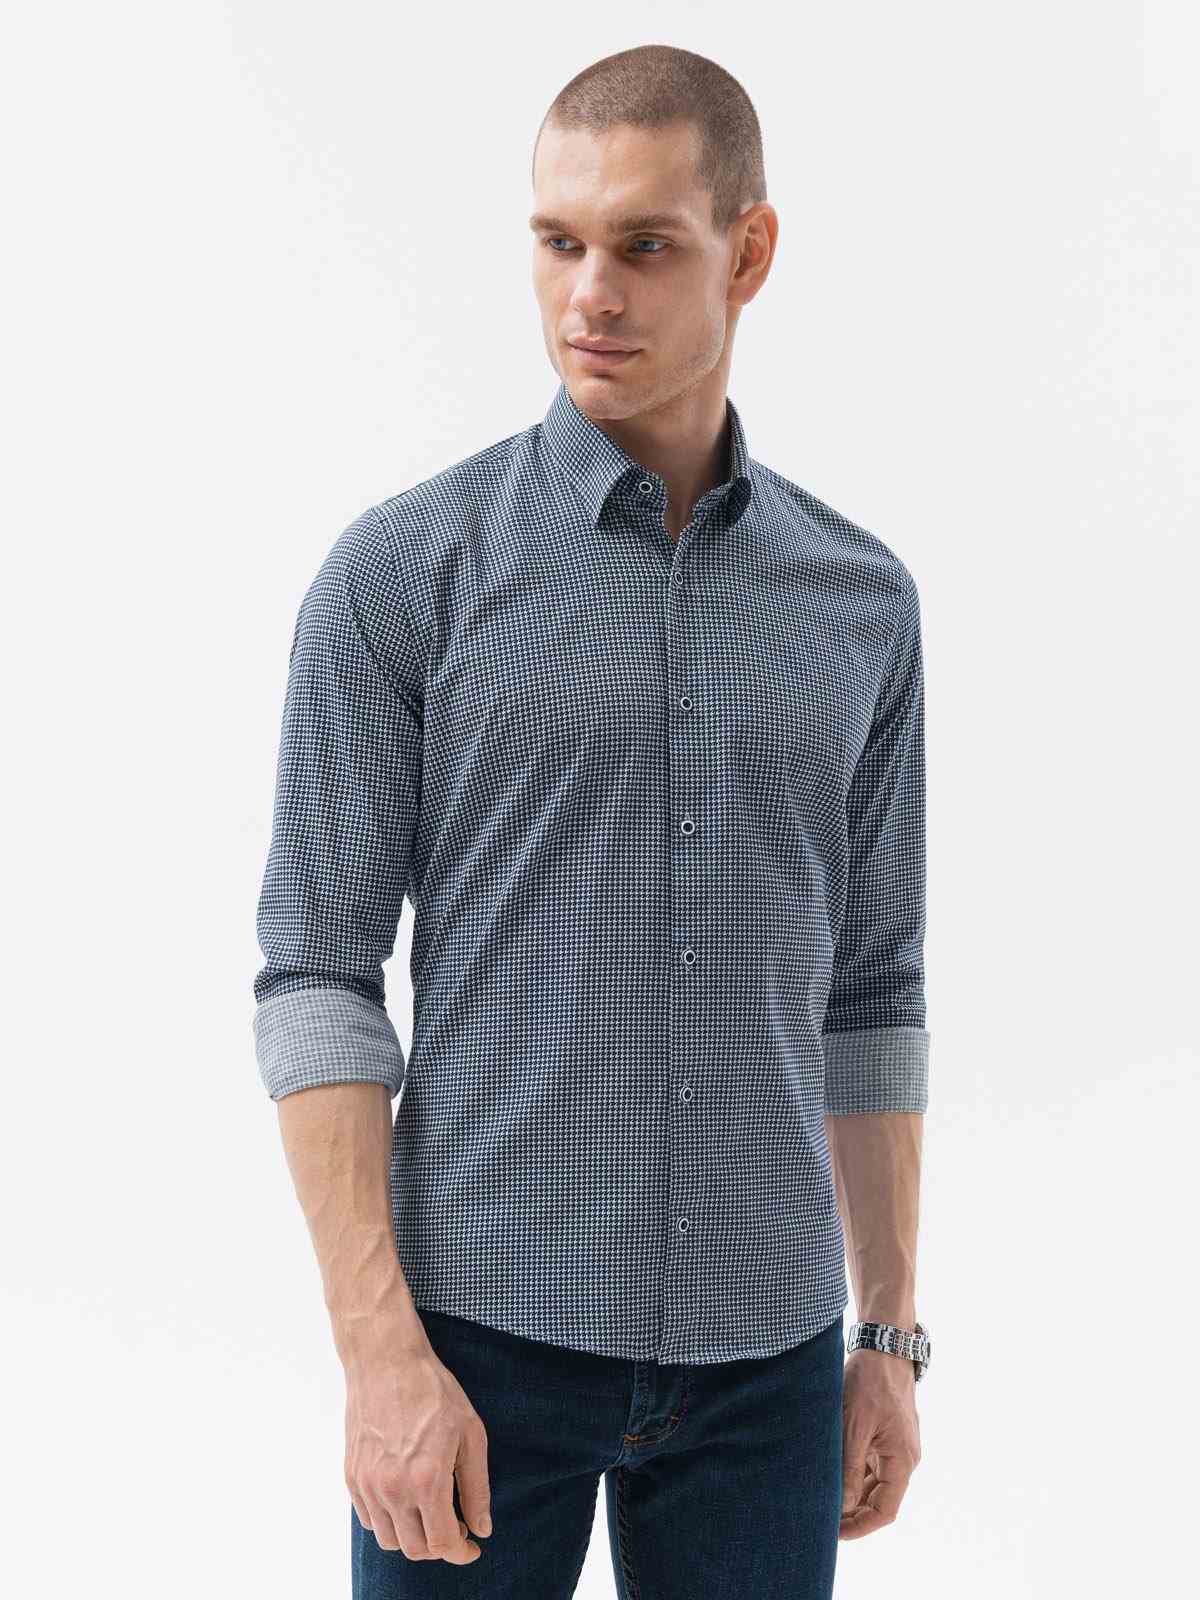 Ombre Clothing Men's shirt with long